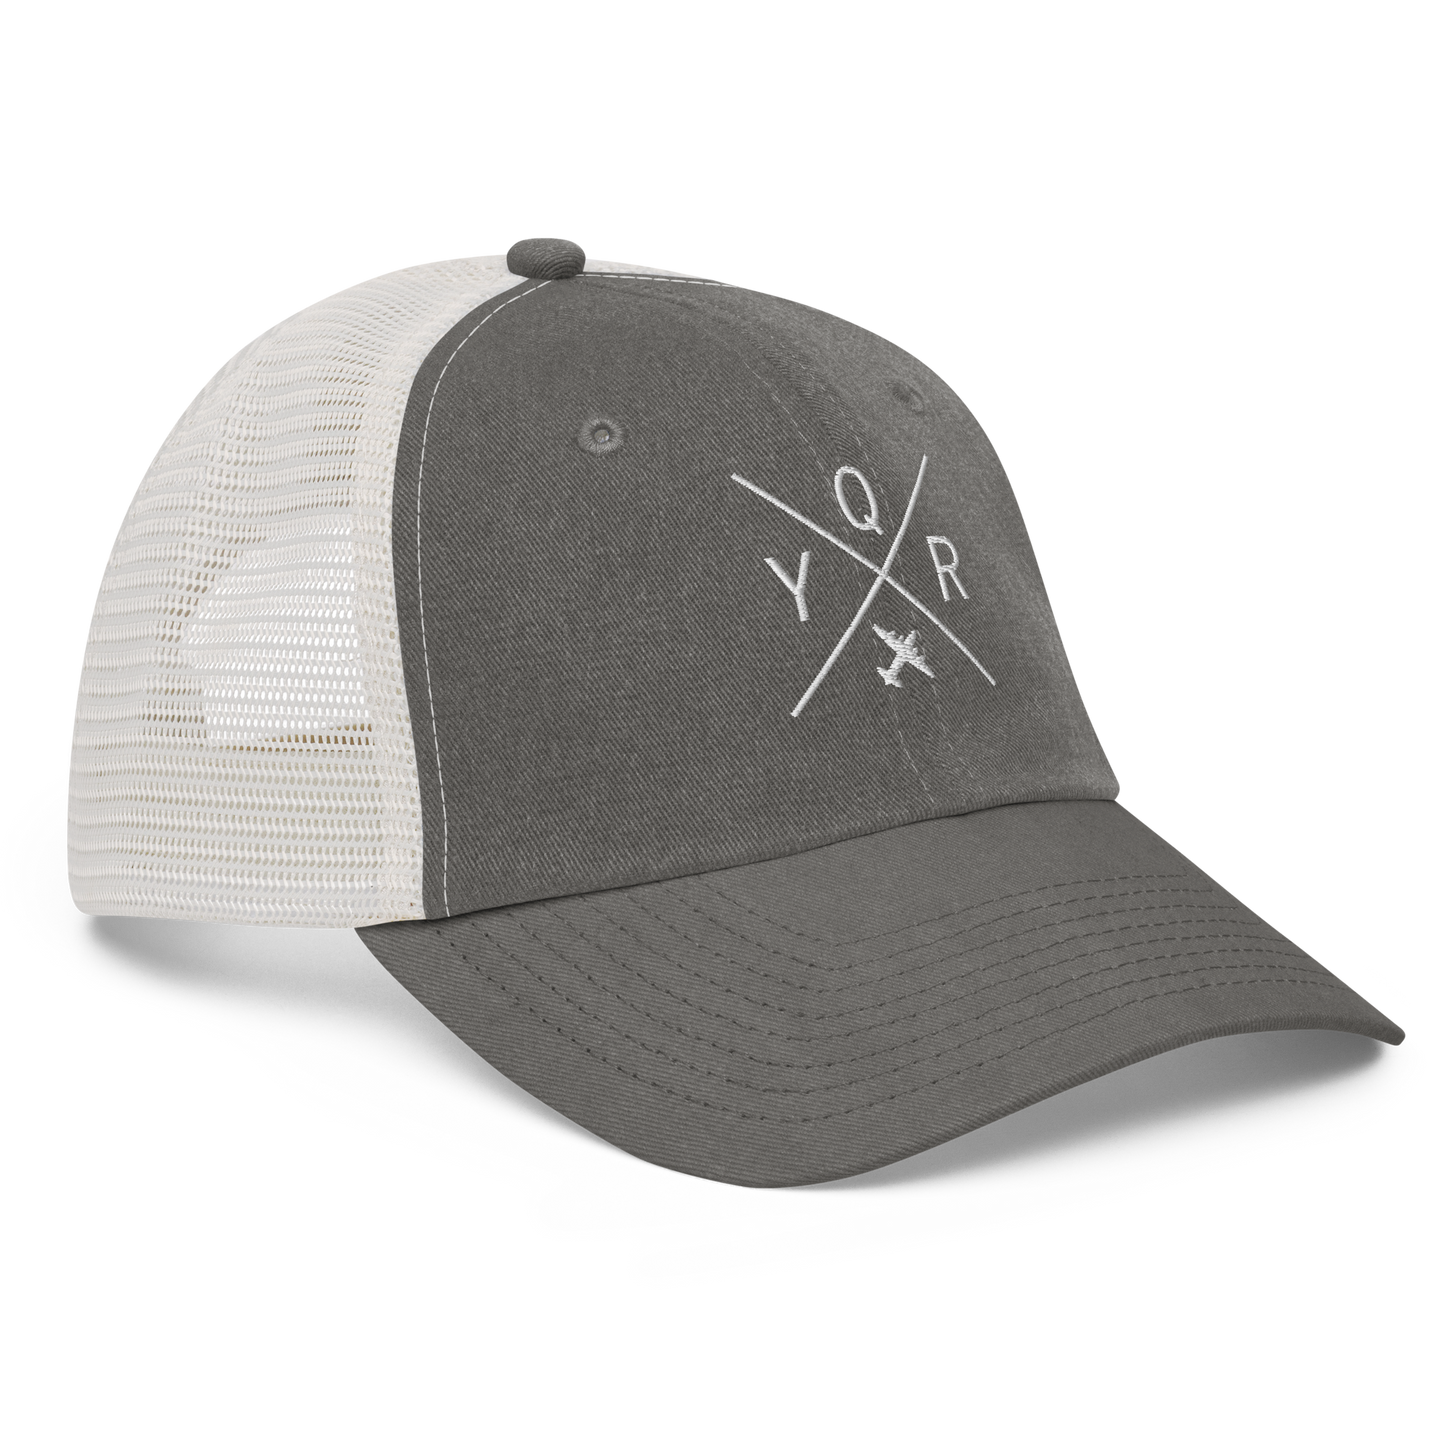 YHM Designs - YQR Regina Pigment-Dyed Trucker Cap - Crossed-X Design with Airport Code and Vintage Propliner - White Embroidery - Image 10